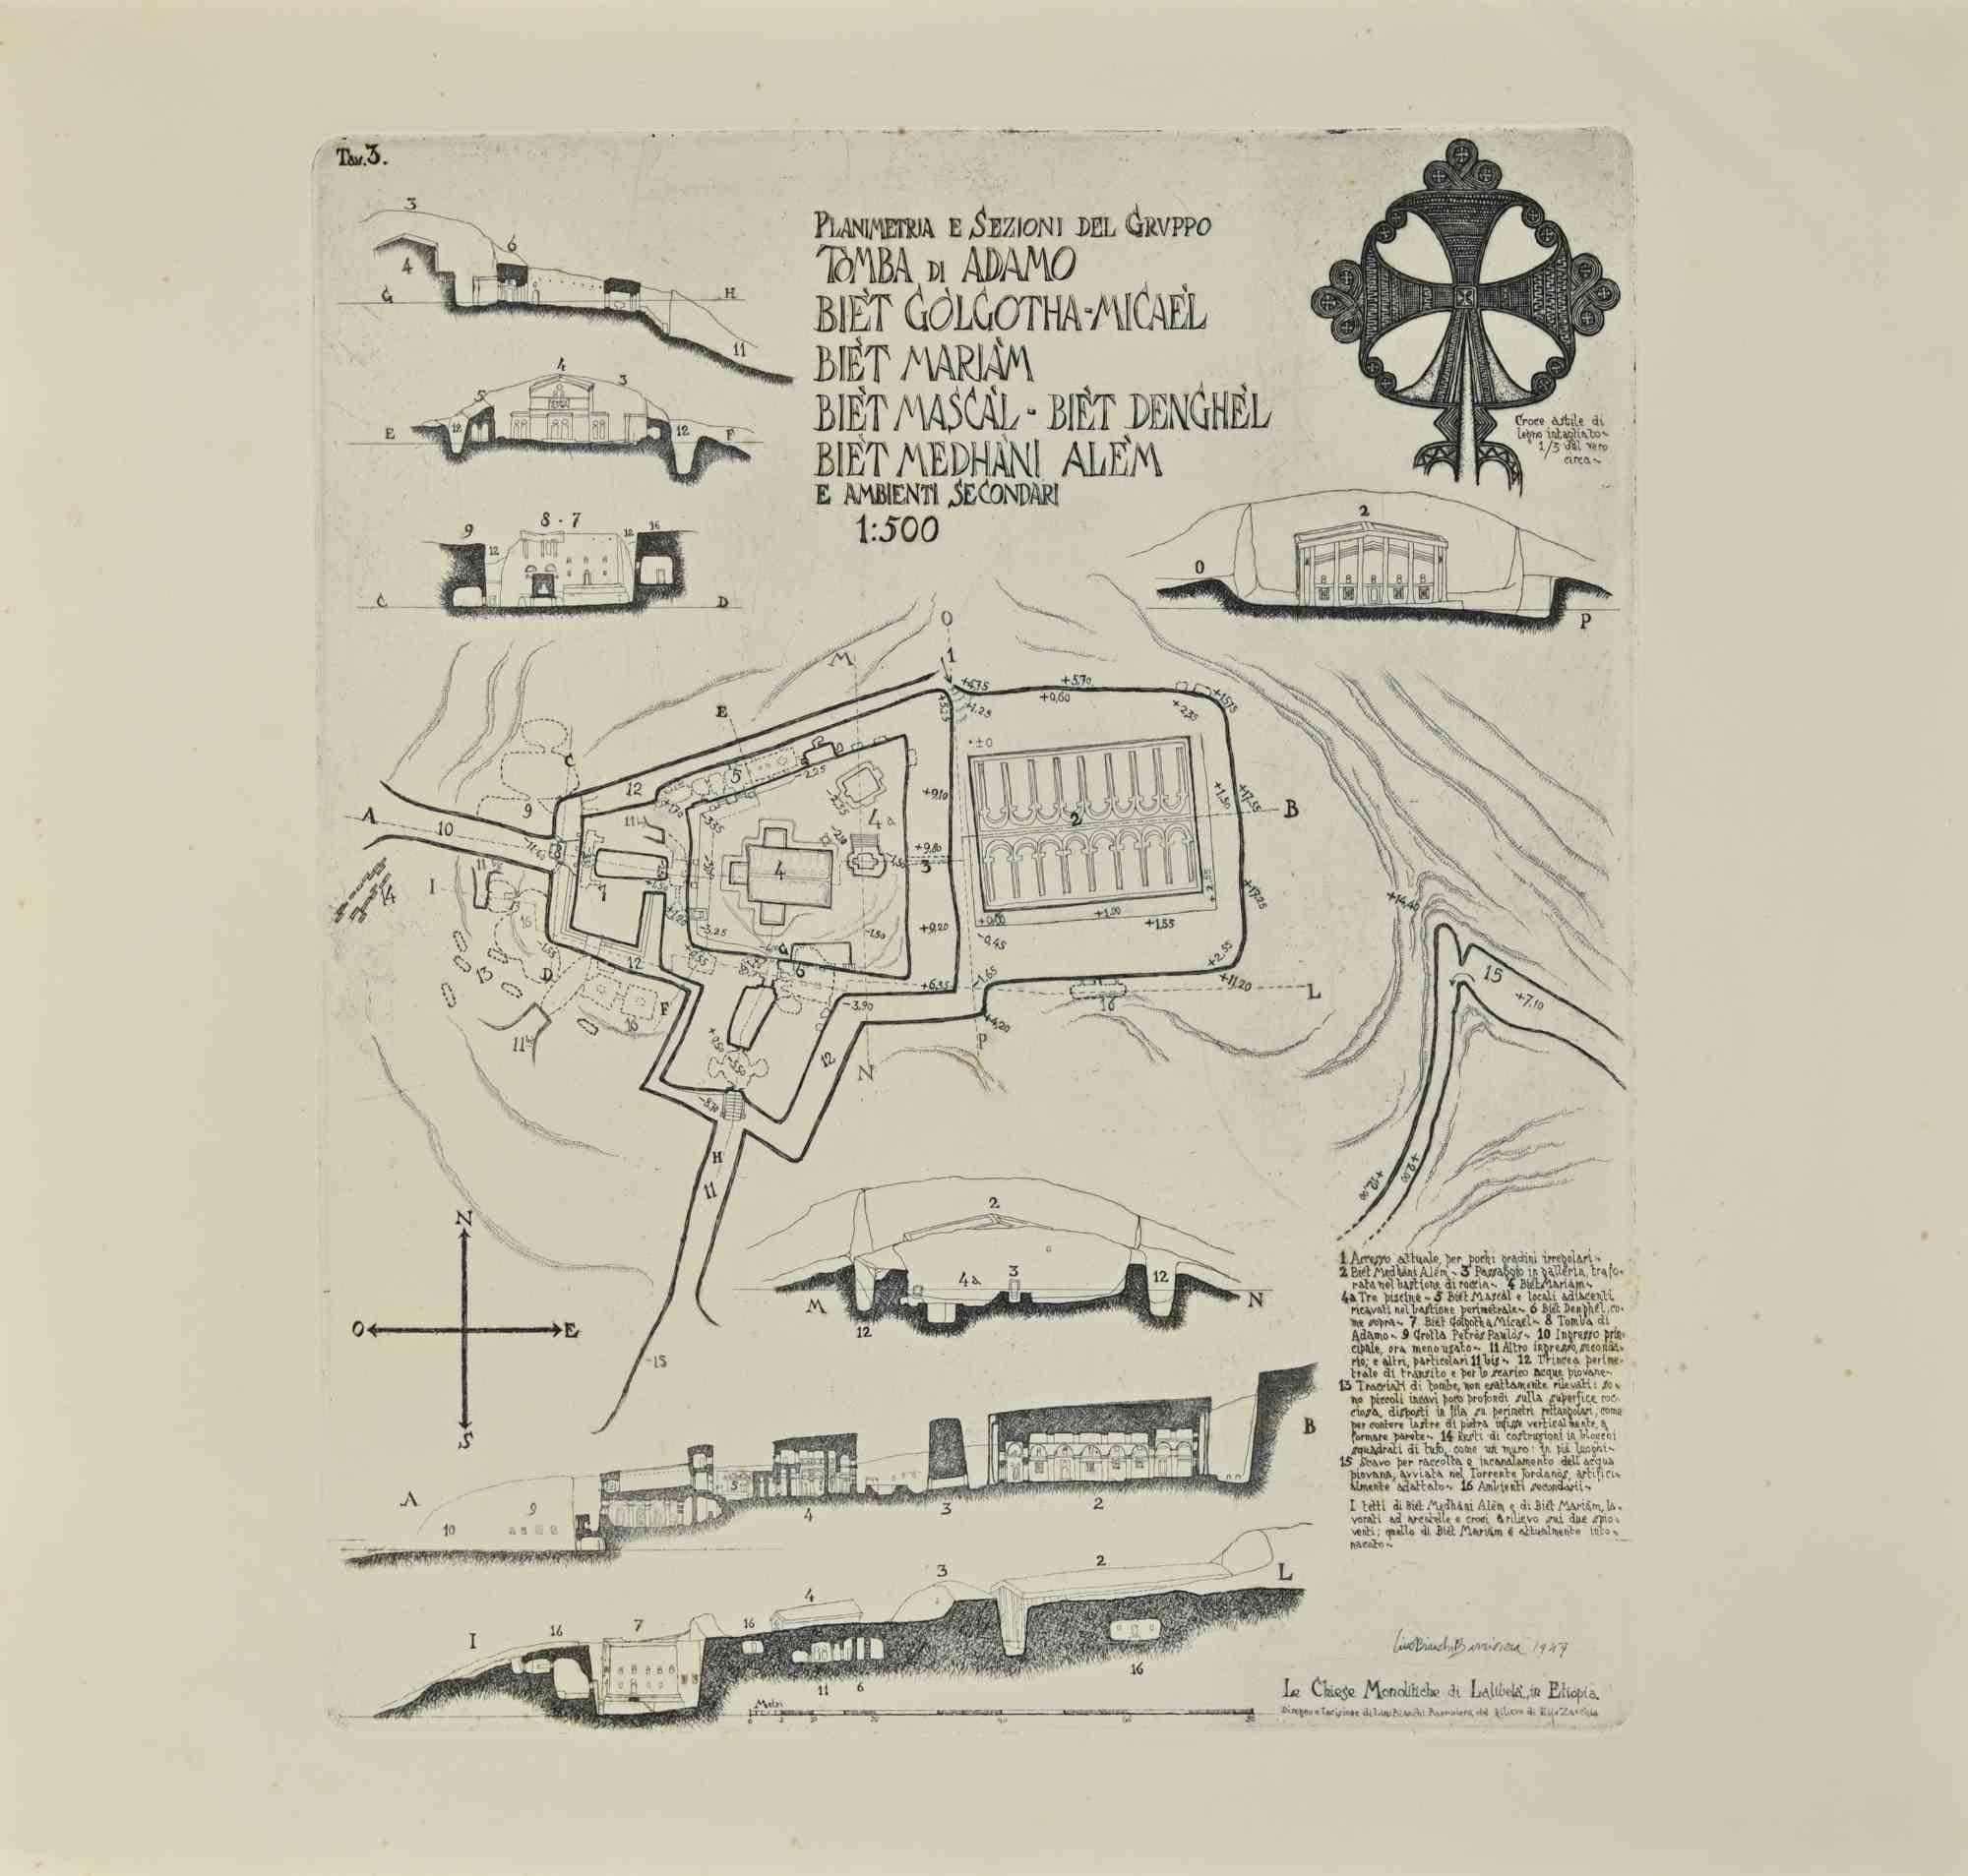 Plan and section of Ethiopian churches is a modern artwork realized by Lino Bianchi Barriviera in 1947.

Black and white etching.

Signed and dated on plate.

Plate n.3 (as reported on the higher margin).

The artwork is from the series "The